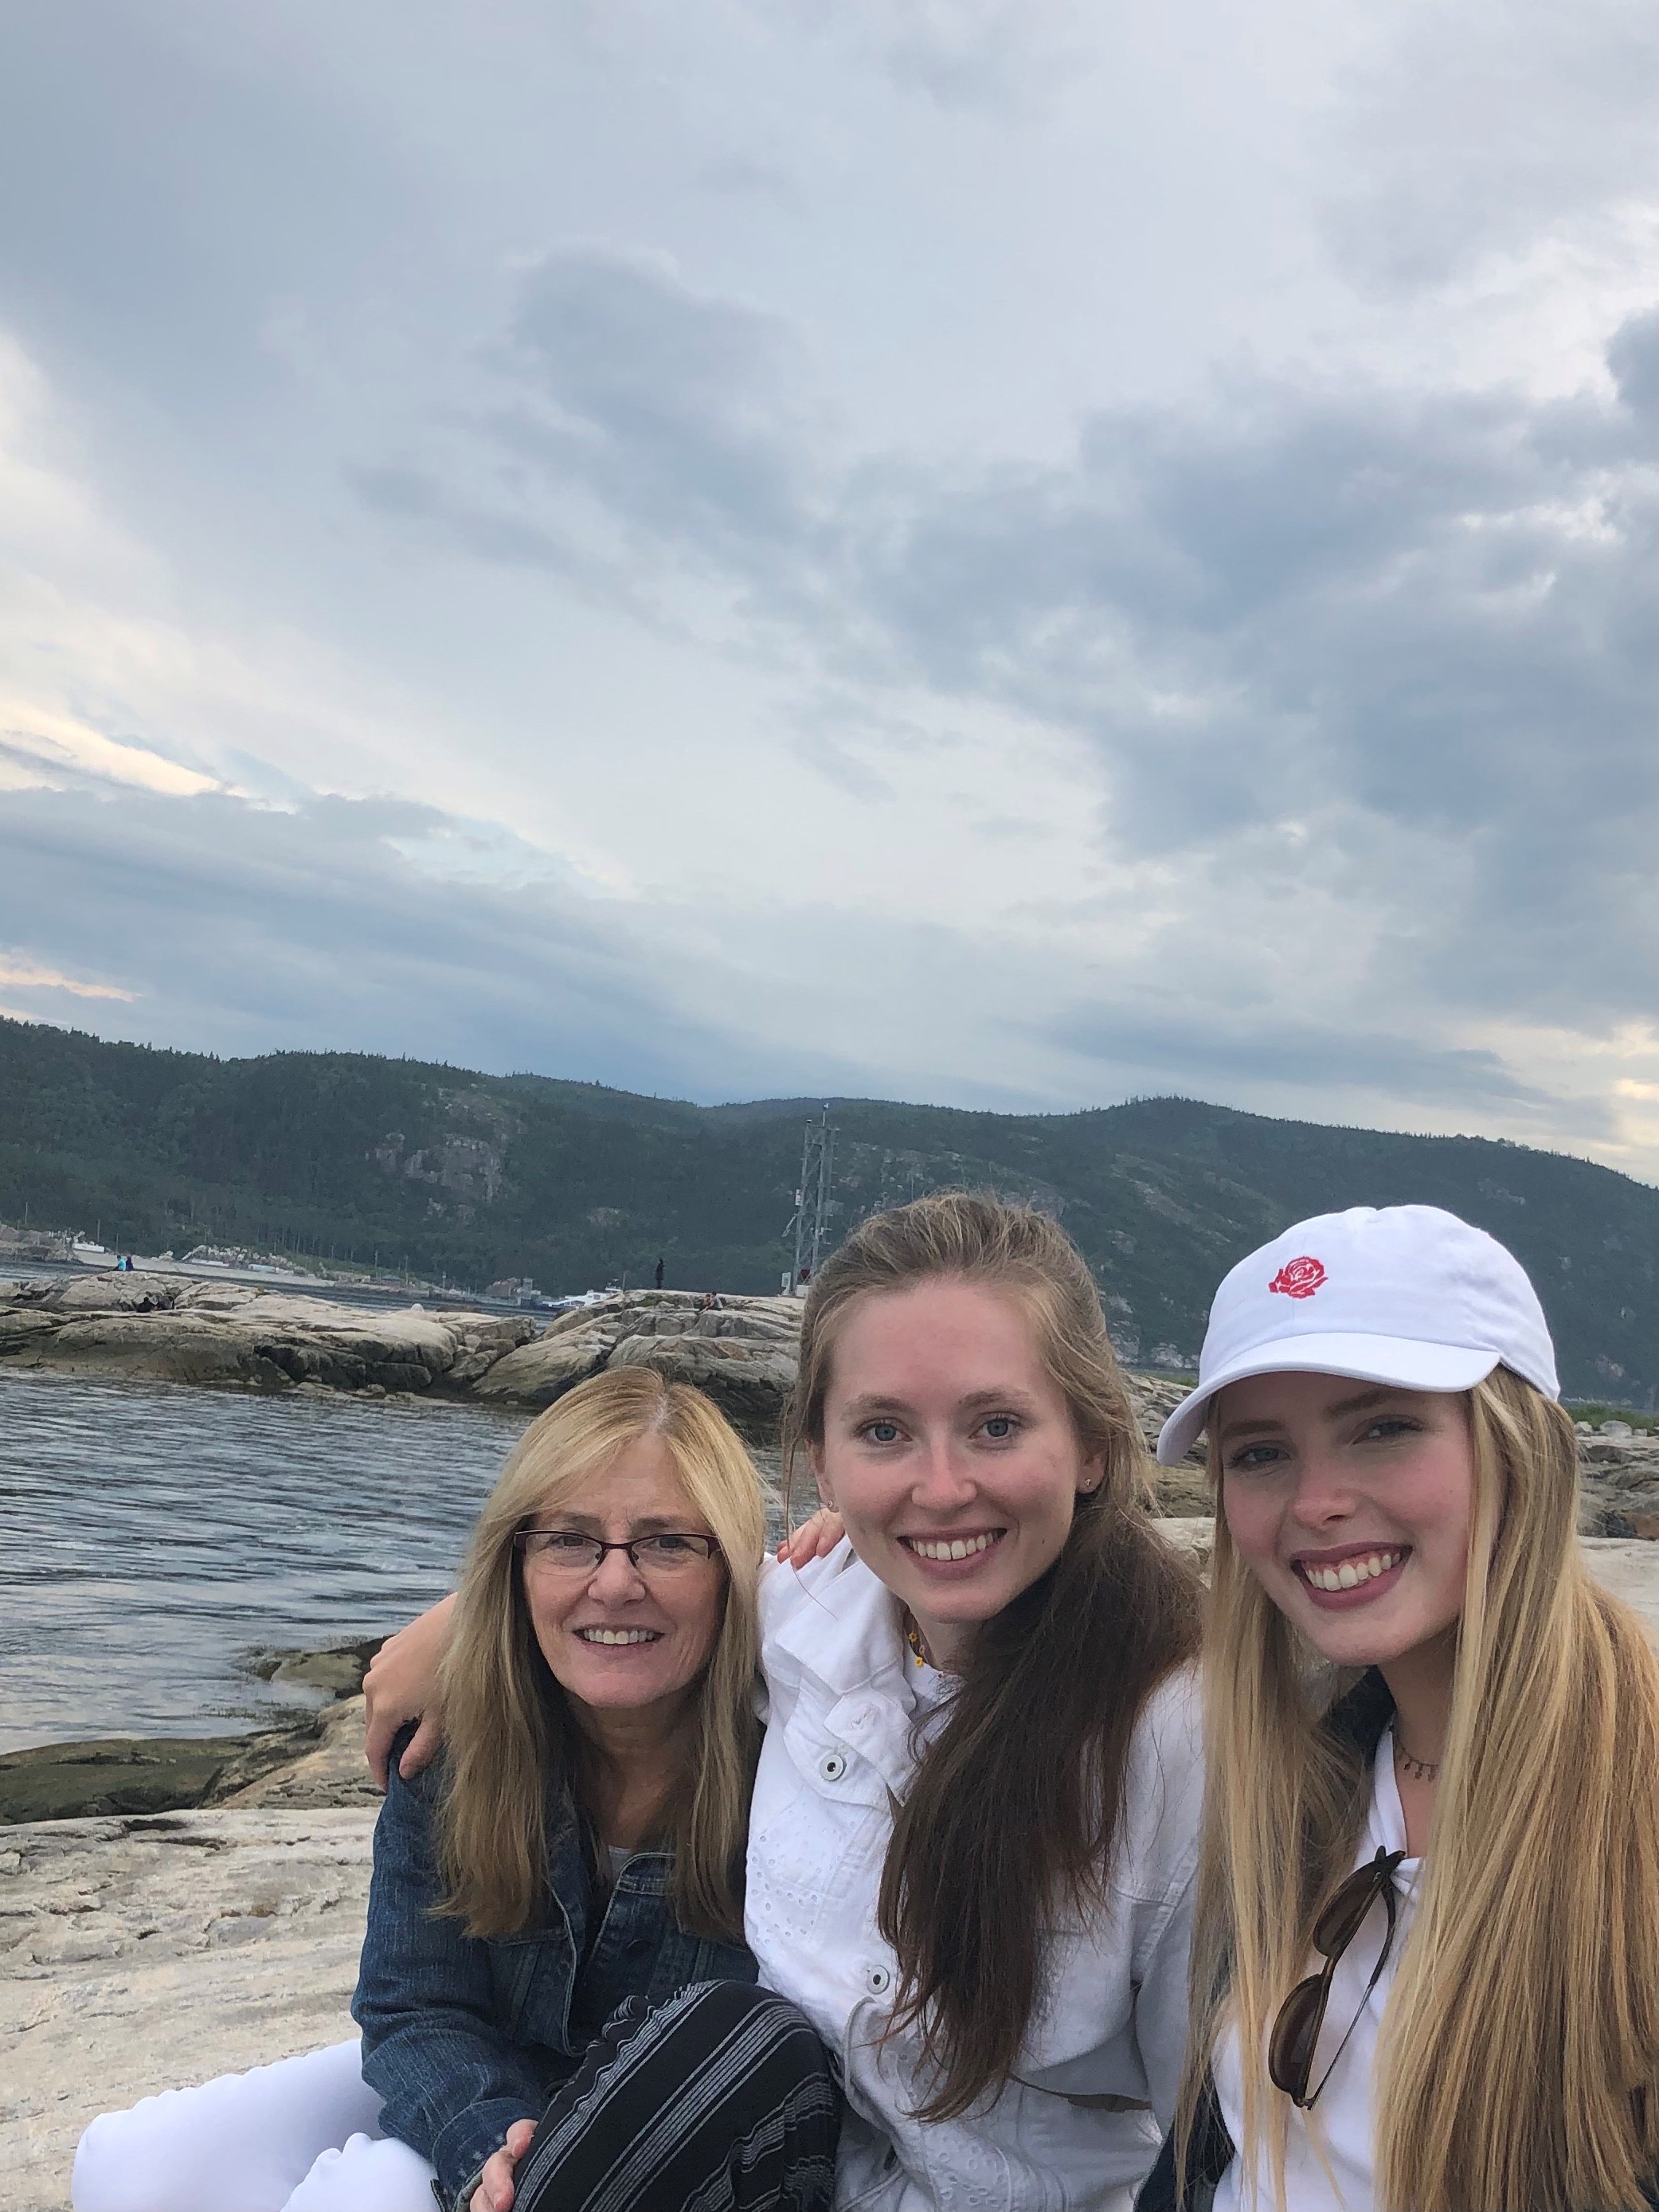 (Left to Right) Brenda, Martha and Nora Collins hiking in Quebec, Canada. Brenda said “Hiking around this area was (literally for me) breathtaking.”